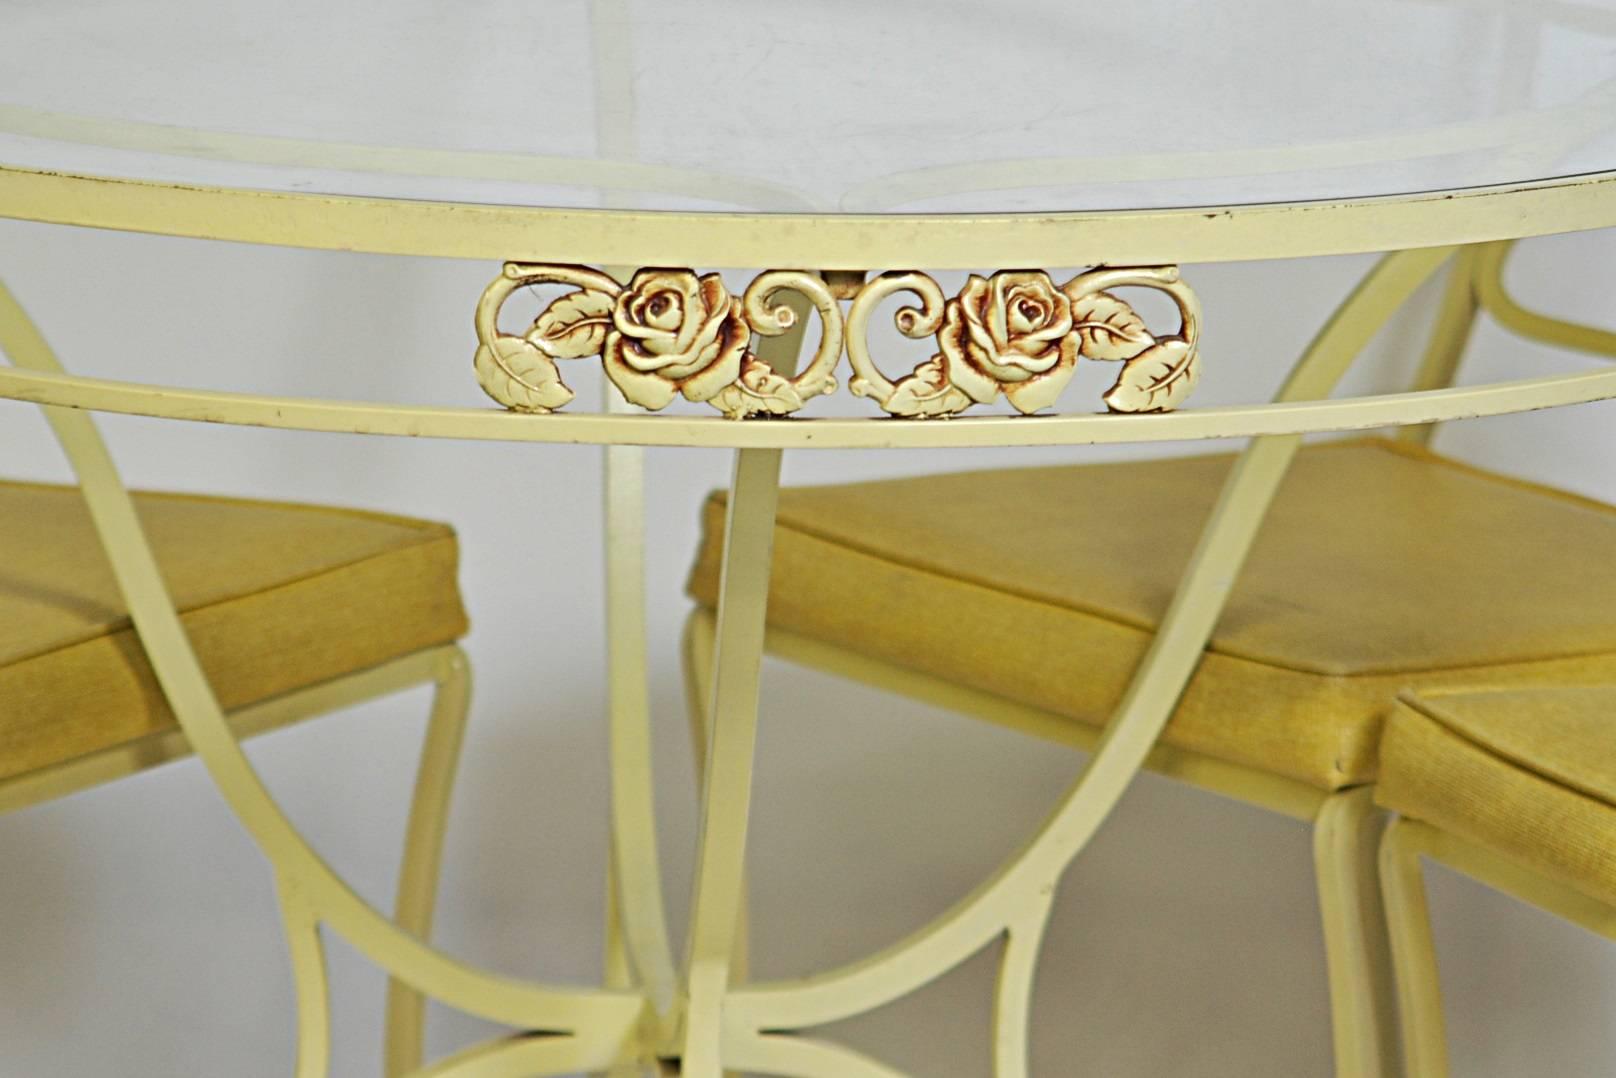 Five-piece wrought iron dining/patio set. Yellow painted with a floral design. One table and four chairs with vinyl upholstery. The table is 42 inches in diameter and 28.75 inches high. Chair dimensions are below.